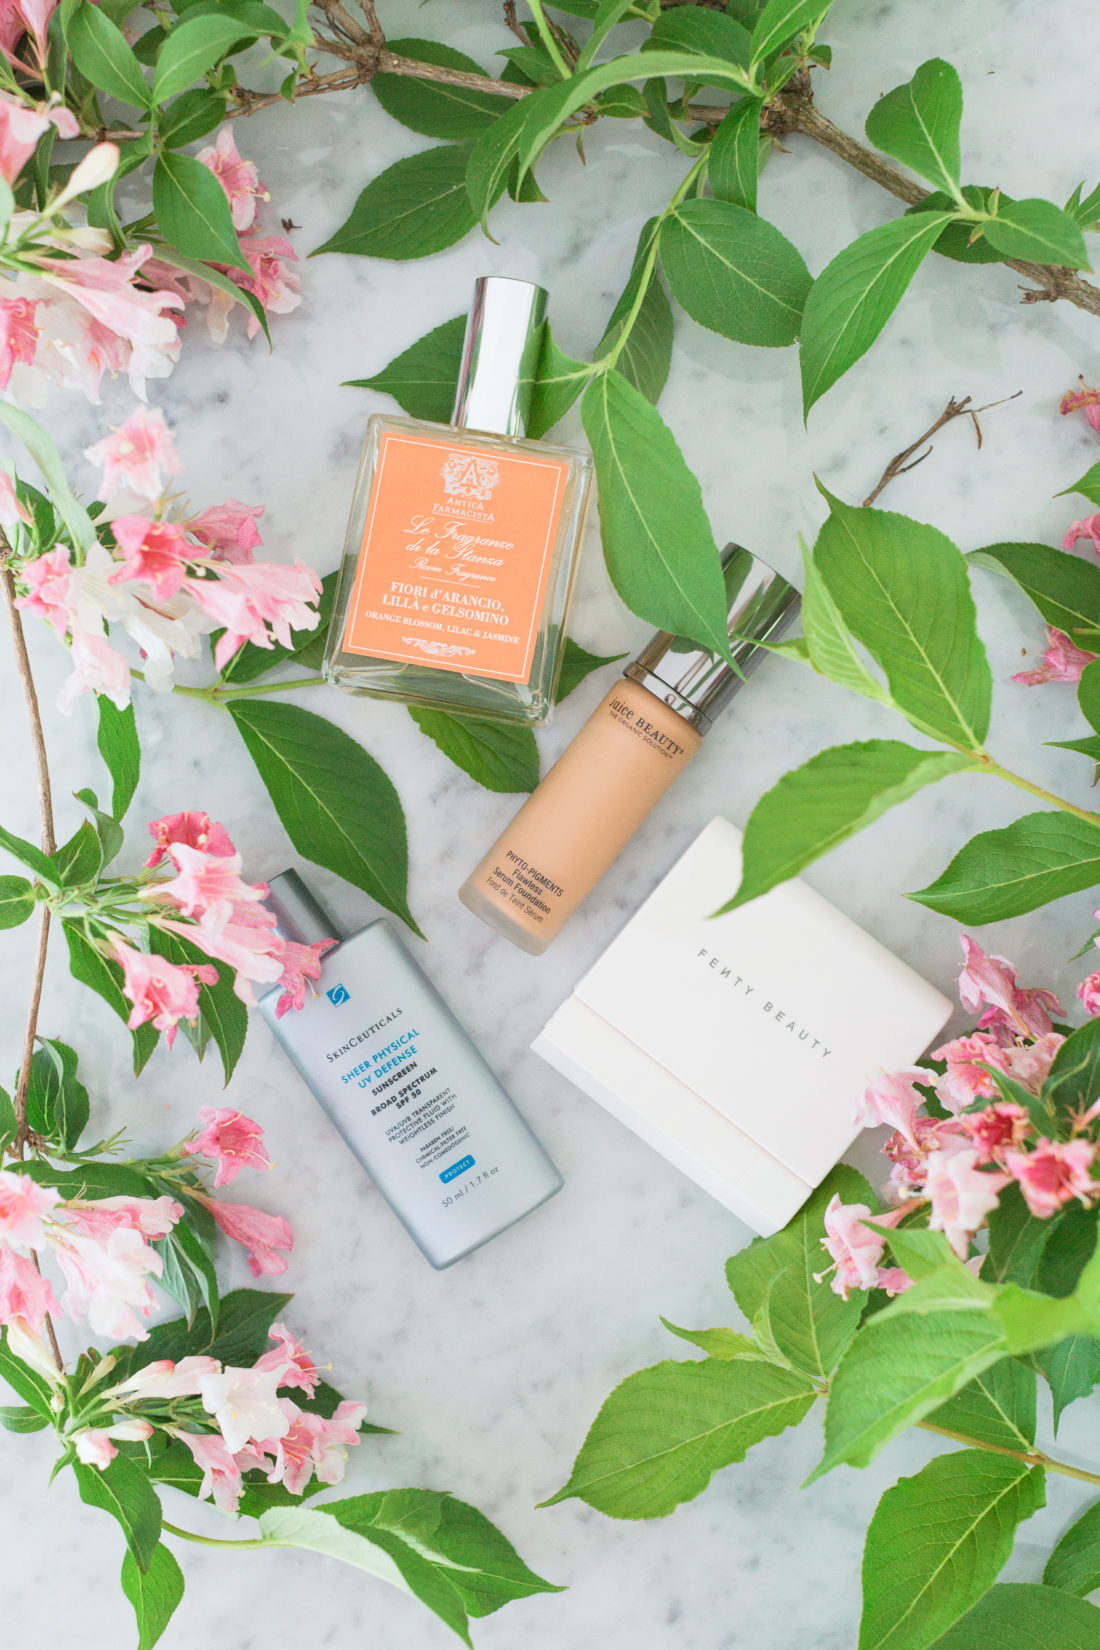 Eva Amurri Martino shares a roundup of her favorite beauty and home products for june, including a room spray, a sunscreen, a foundation and a blotting system